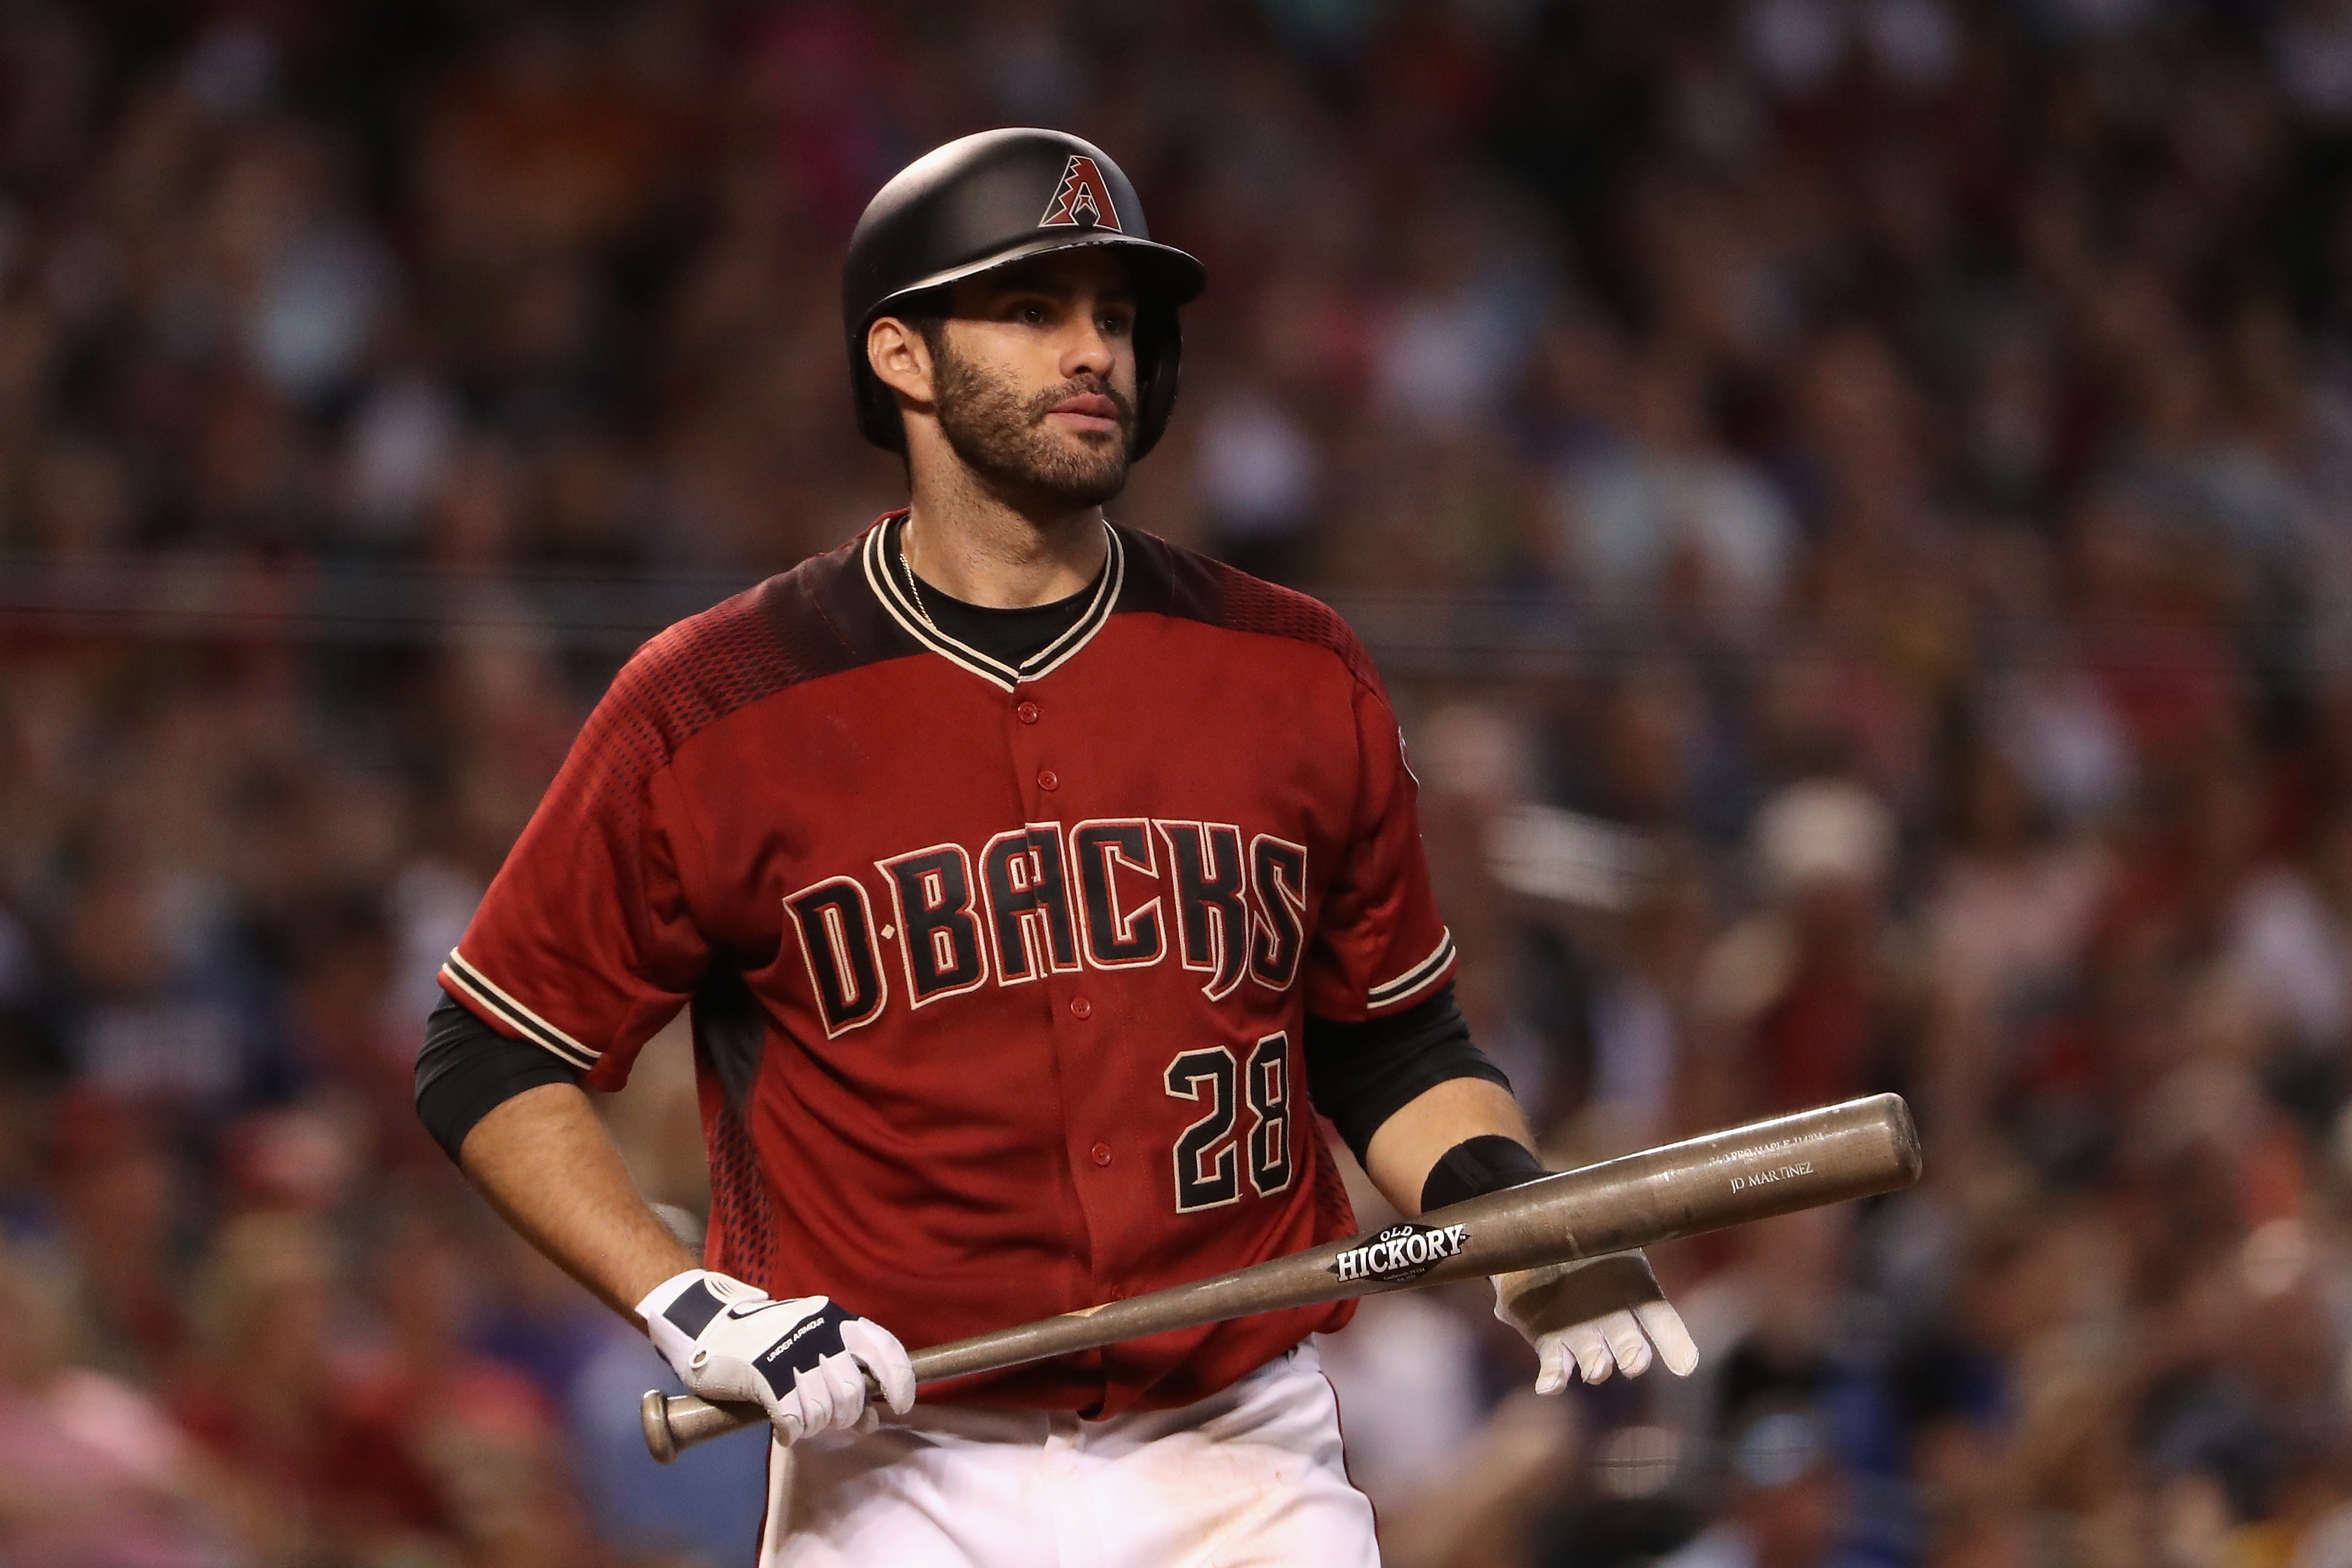 J.D. Martinez, surprised to still be with the team, sorts through